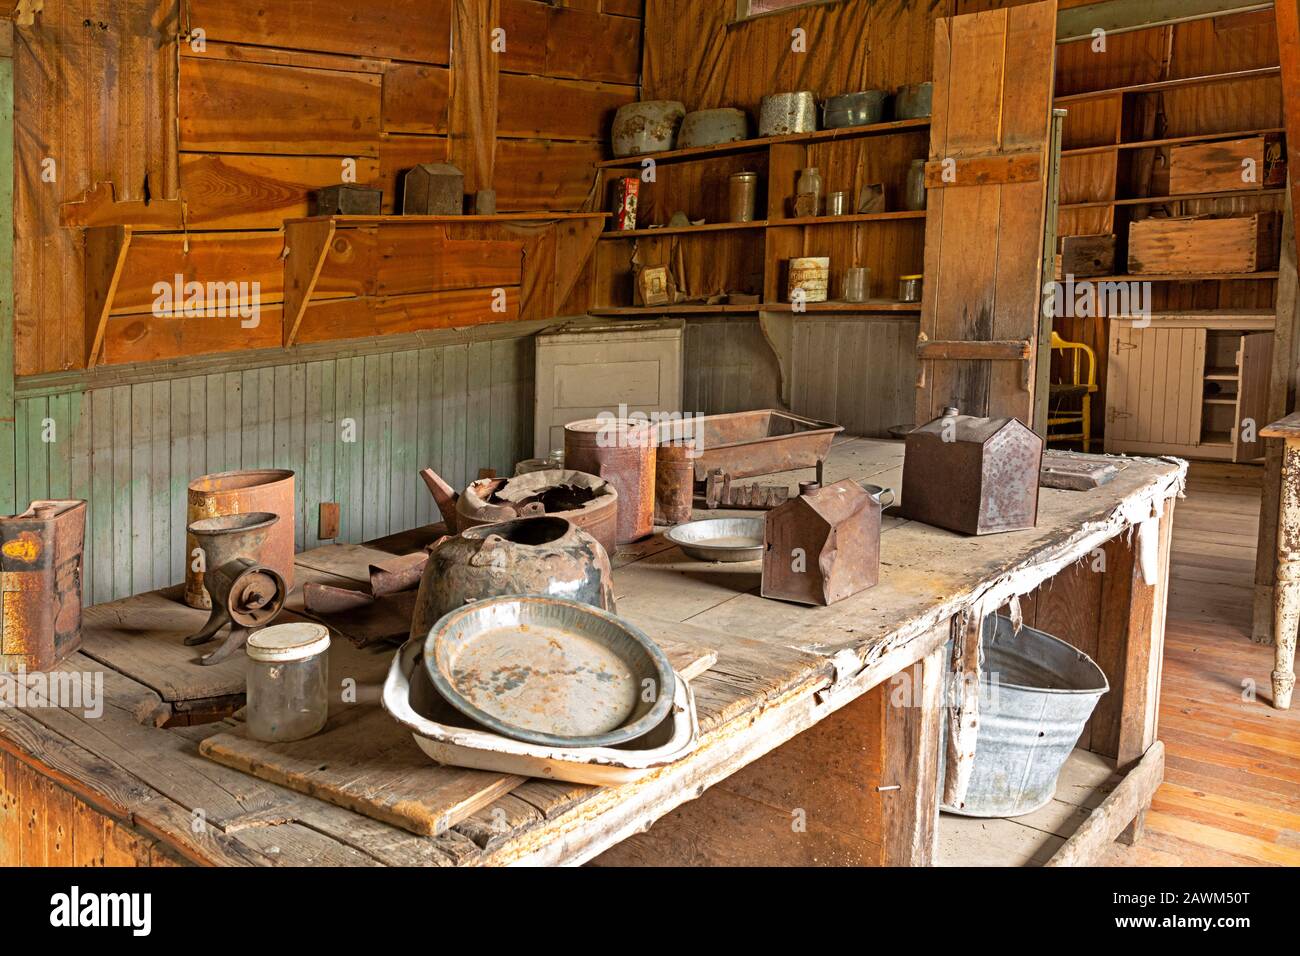 MT00501-00...MONTANA - Display of old kitchen pots and pans  in the food preparation rooms at the J.K. Wells Hotel, preserved at the ghost town of Gar Stock Photo